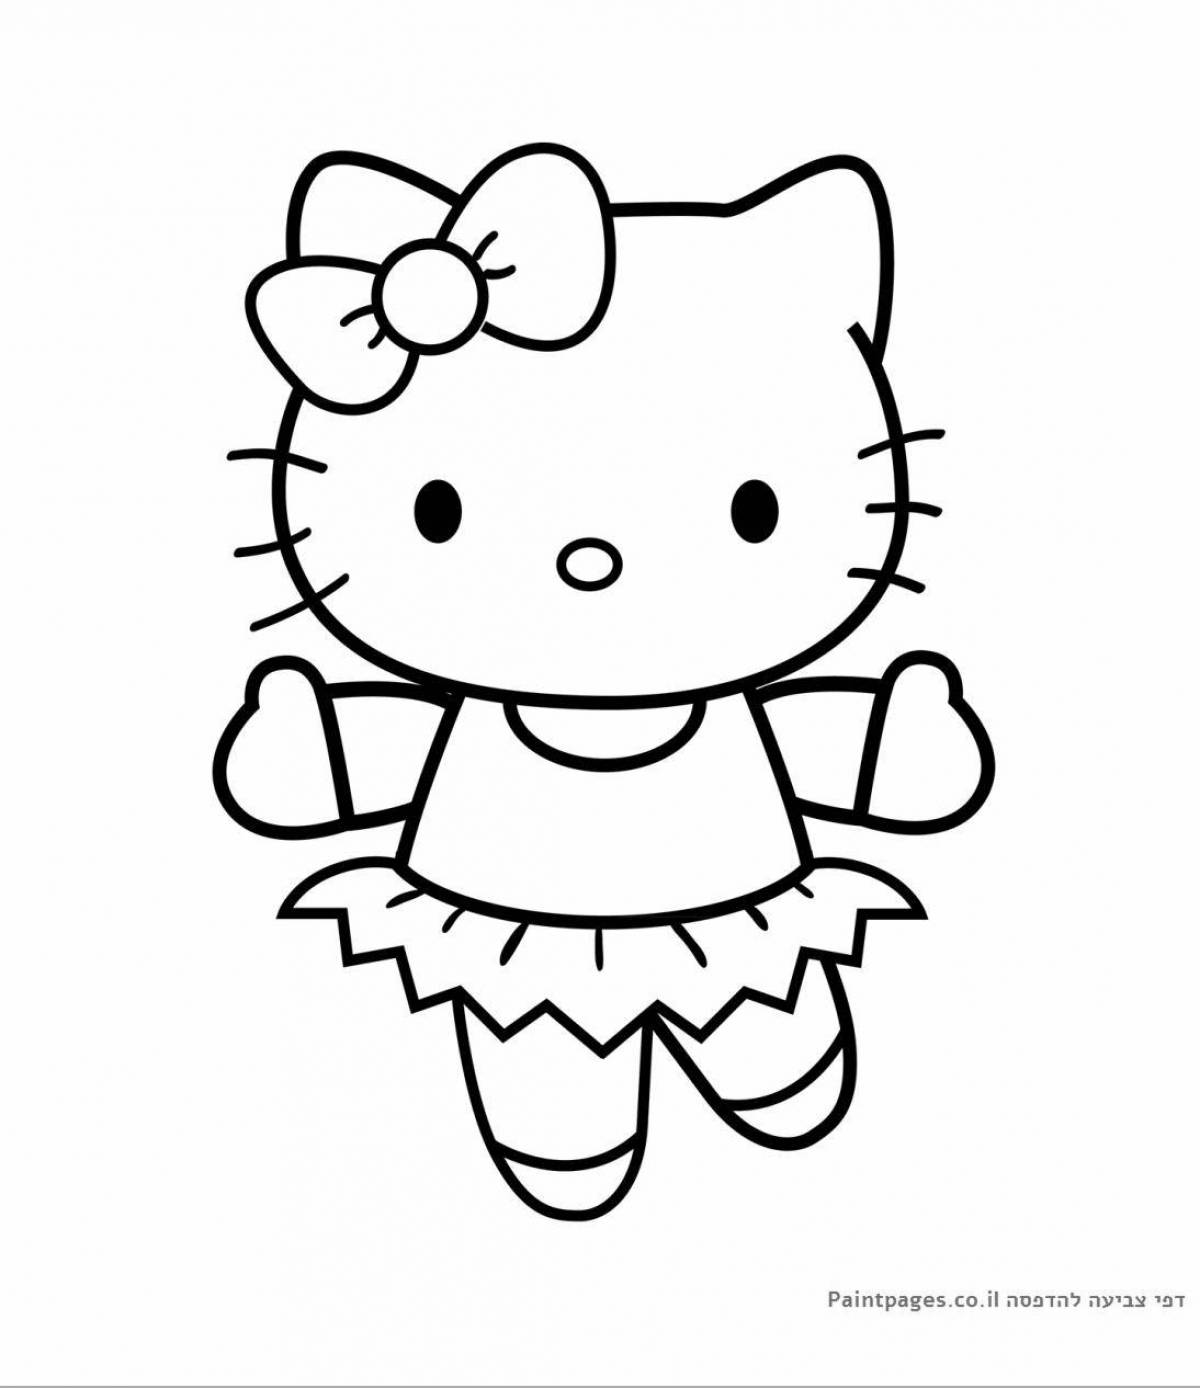 Milady's dazzling hello kitty coloring book